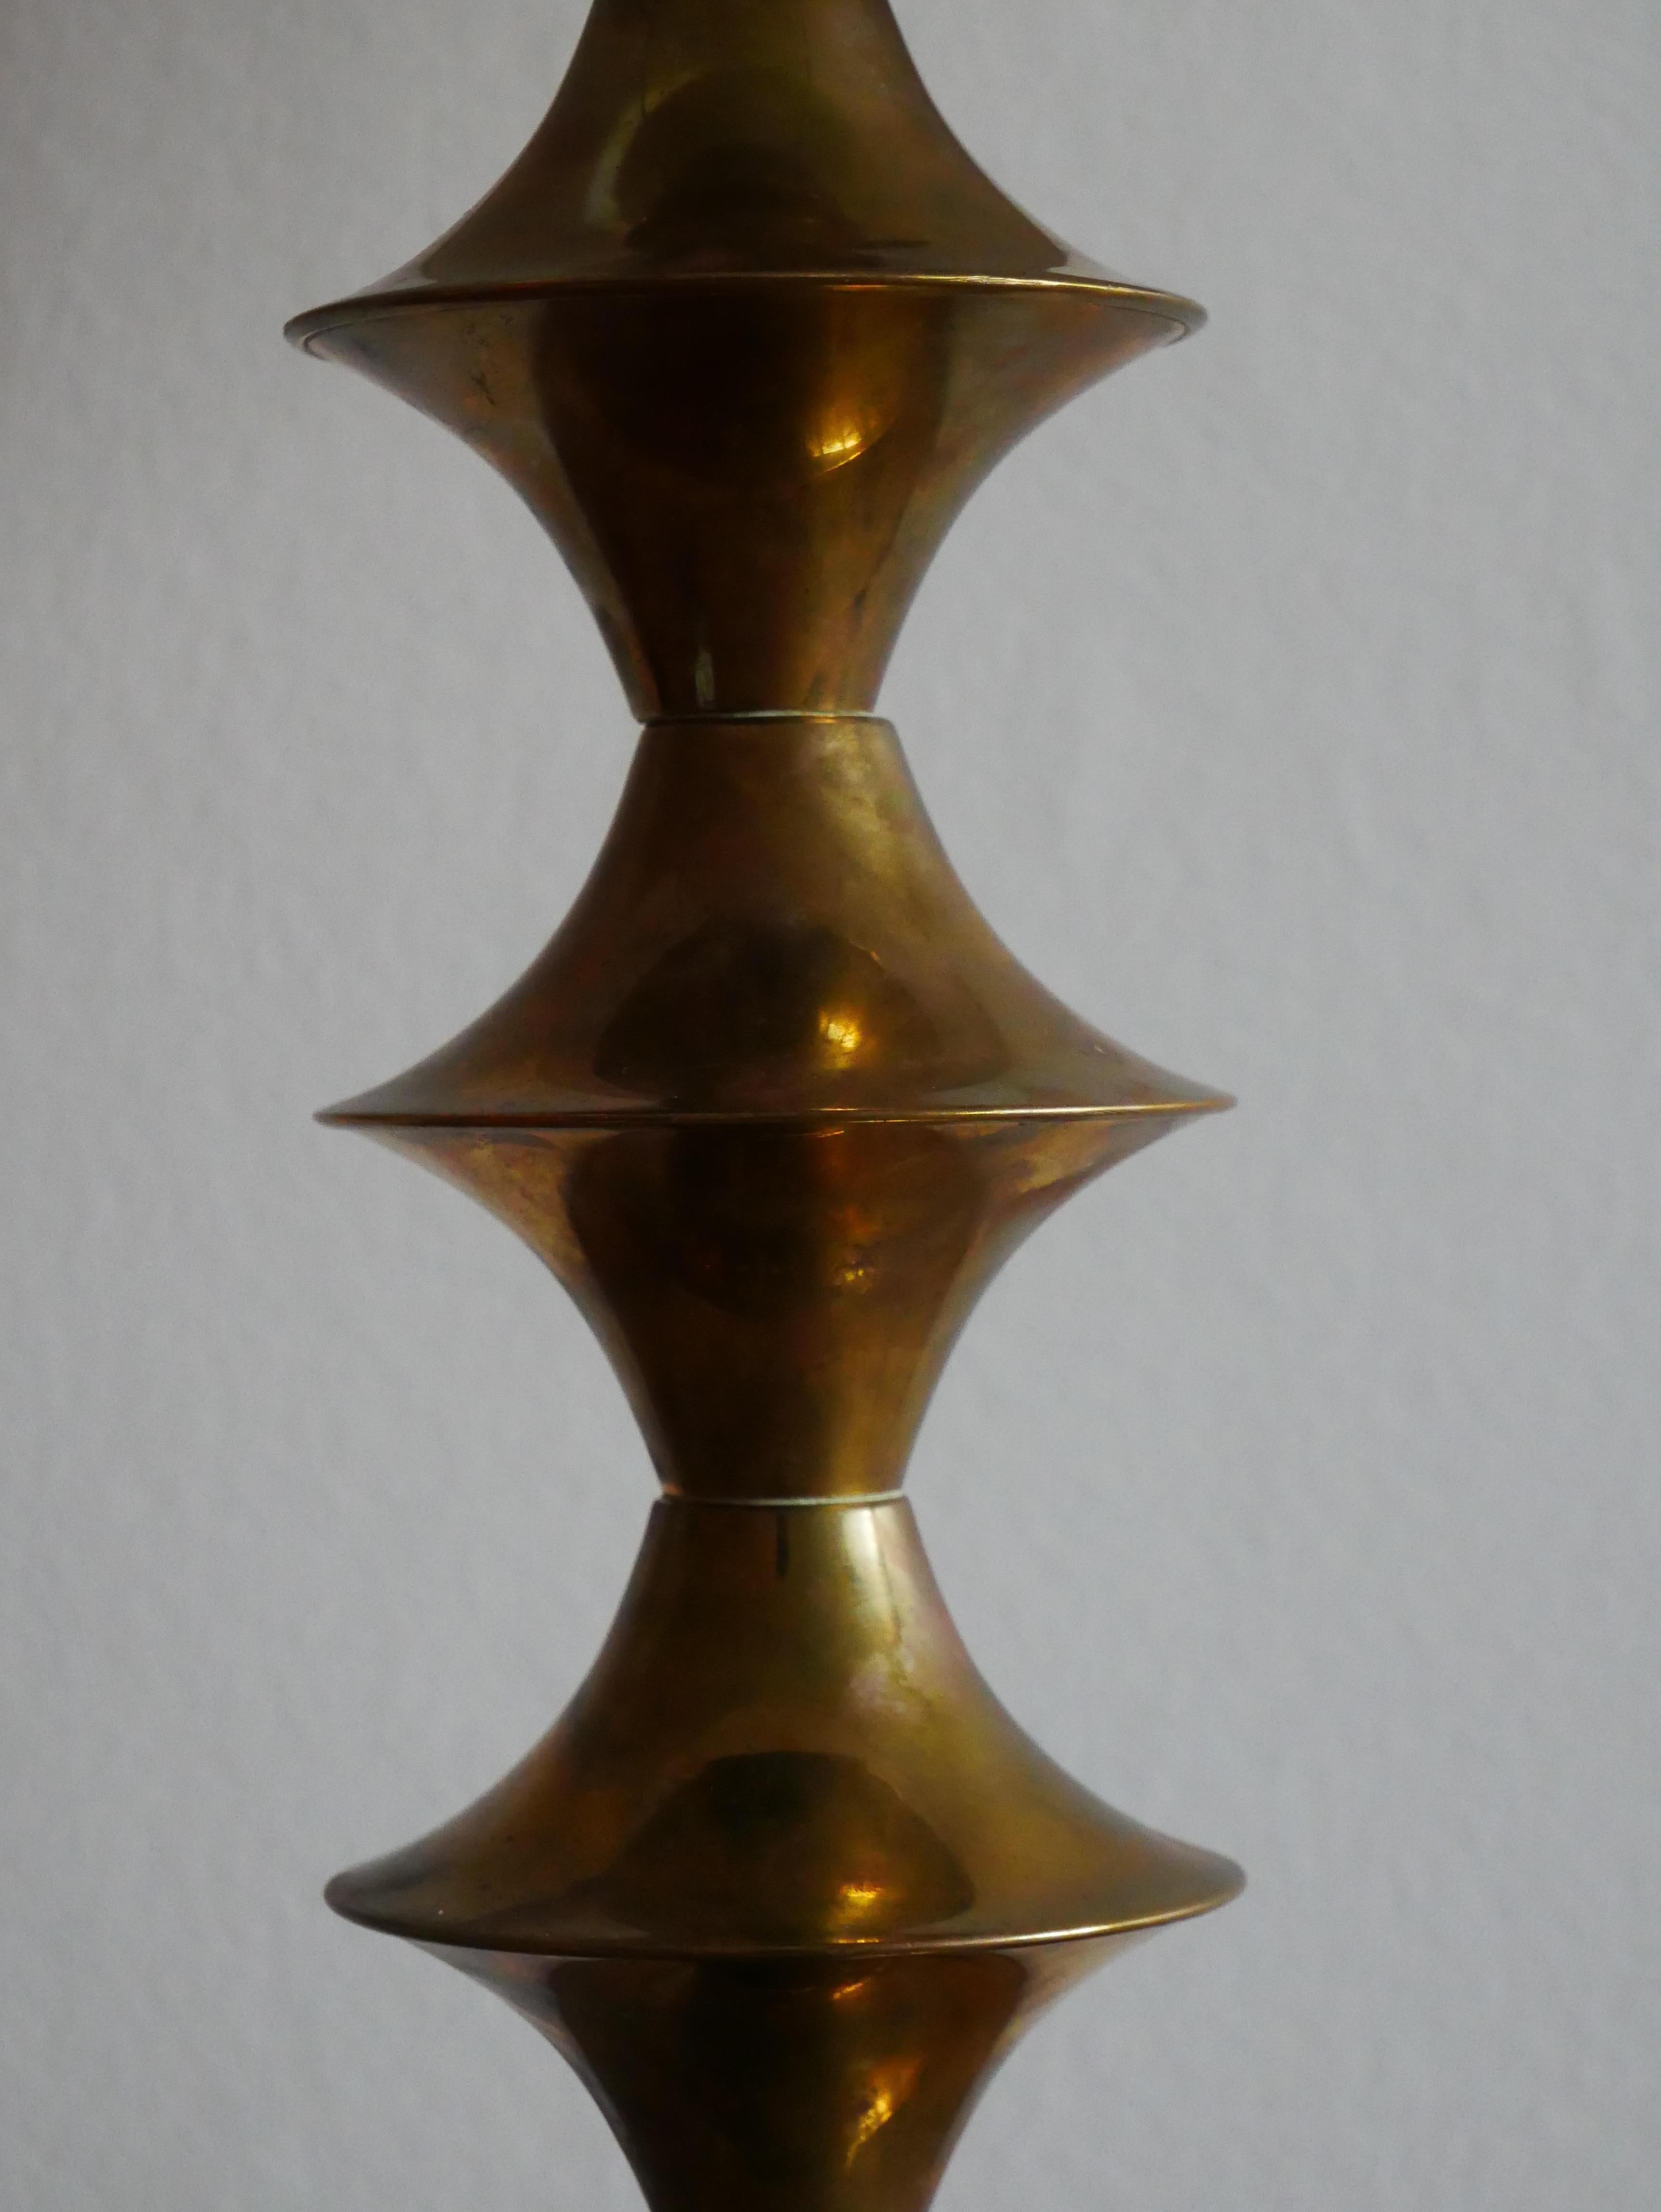 Elit AB Tabel Lamp, made in Sweden 1960 In Good Condition For Sale In Farsta, SE